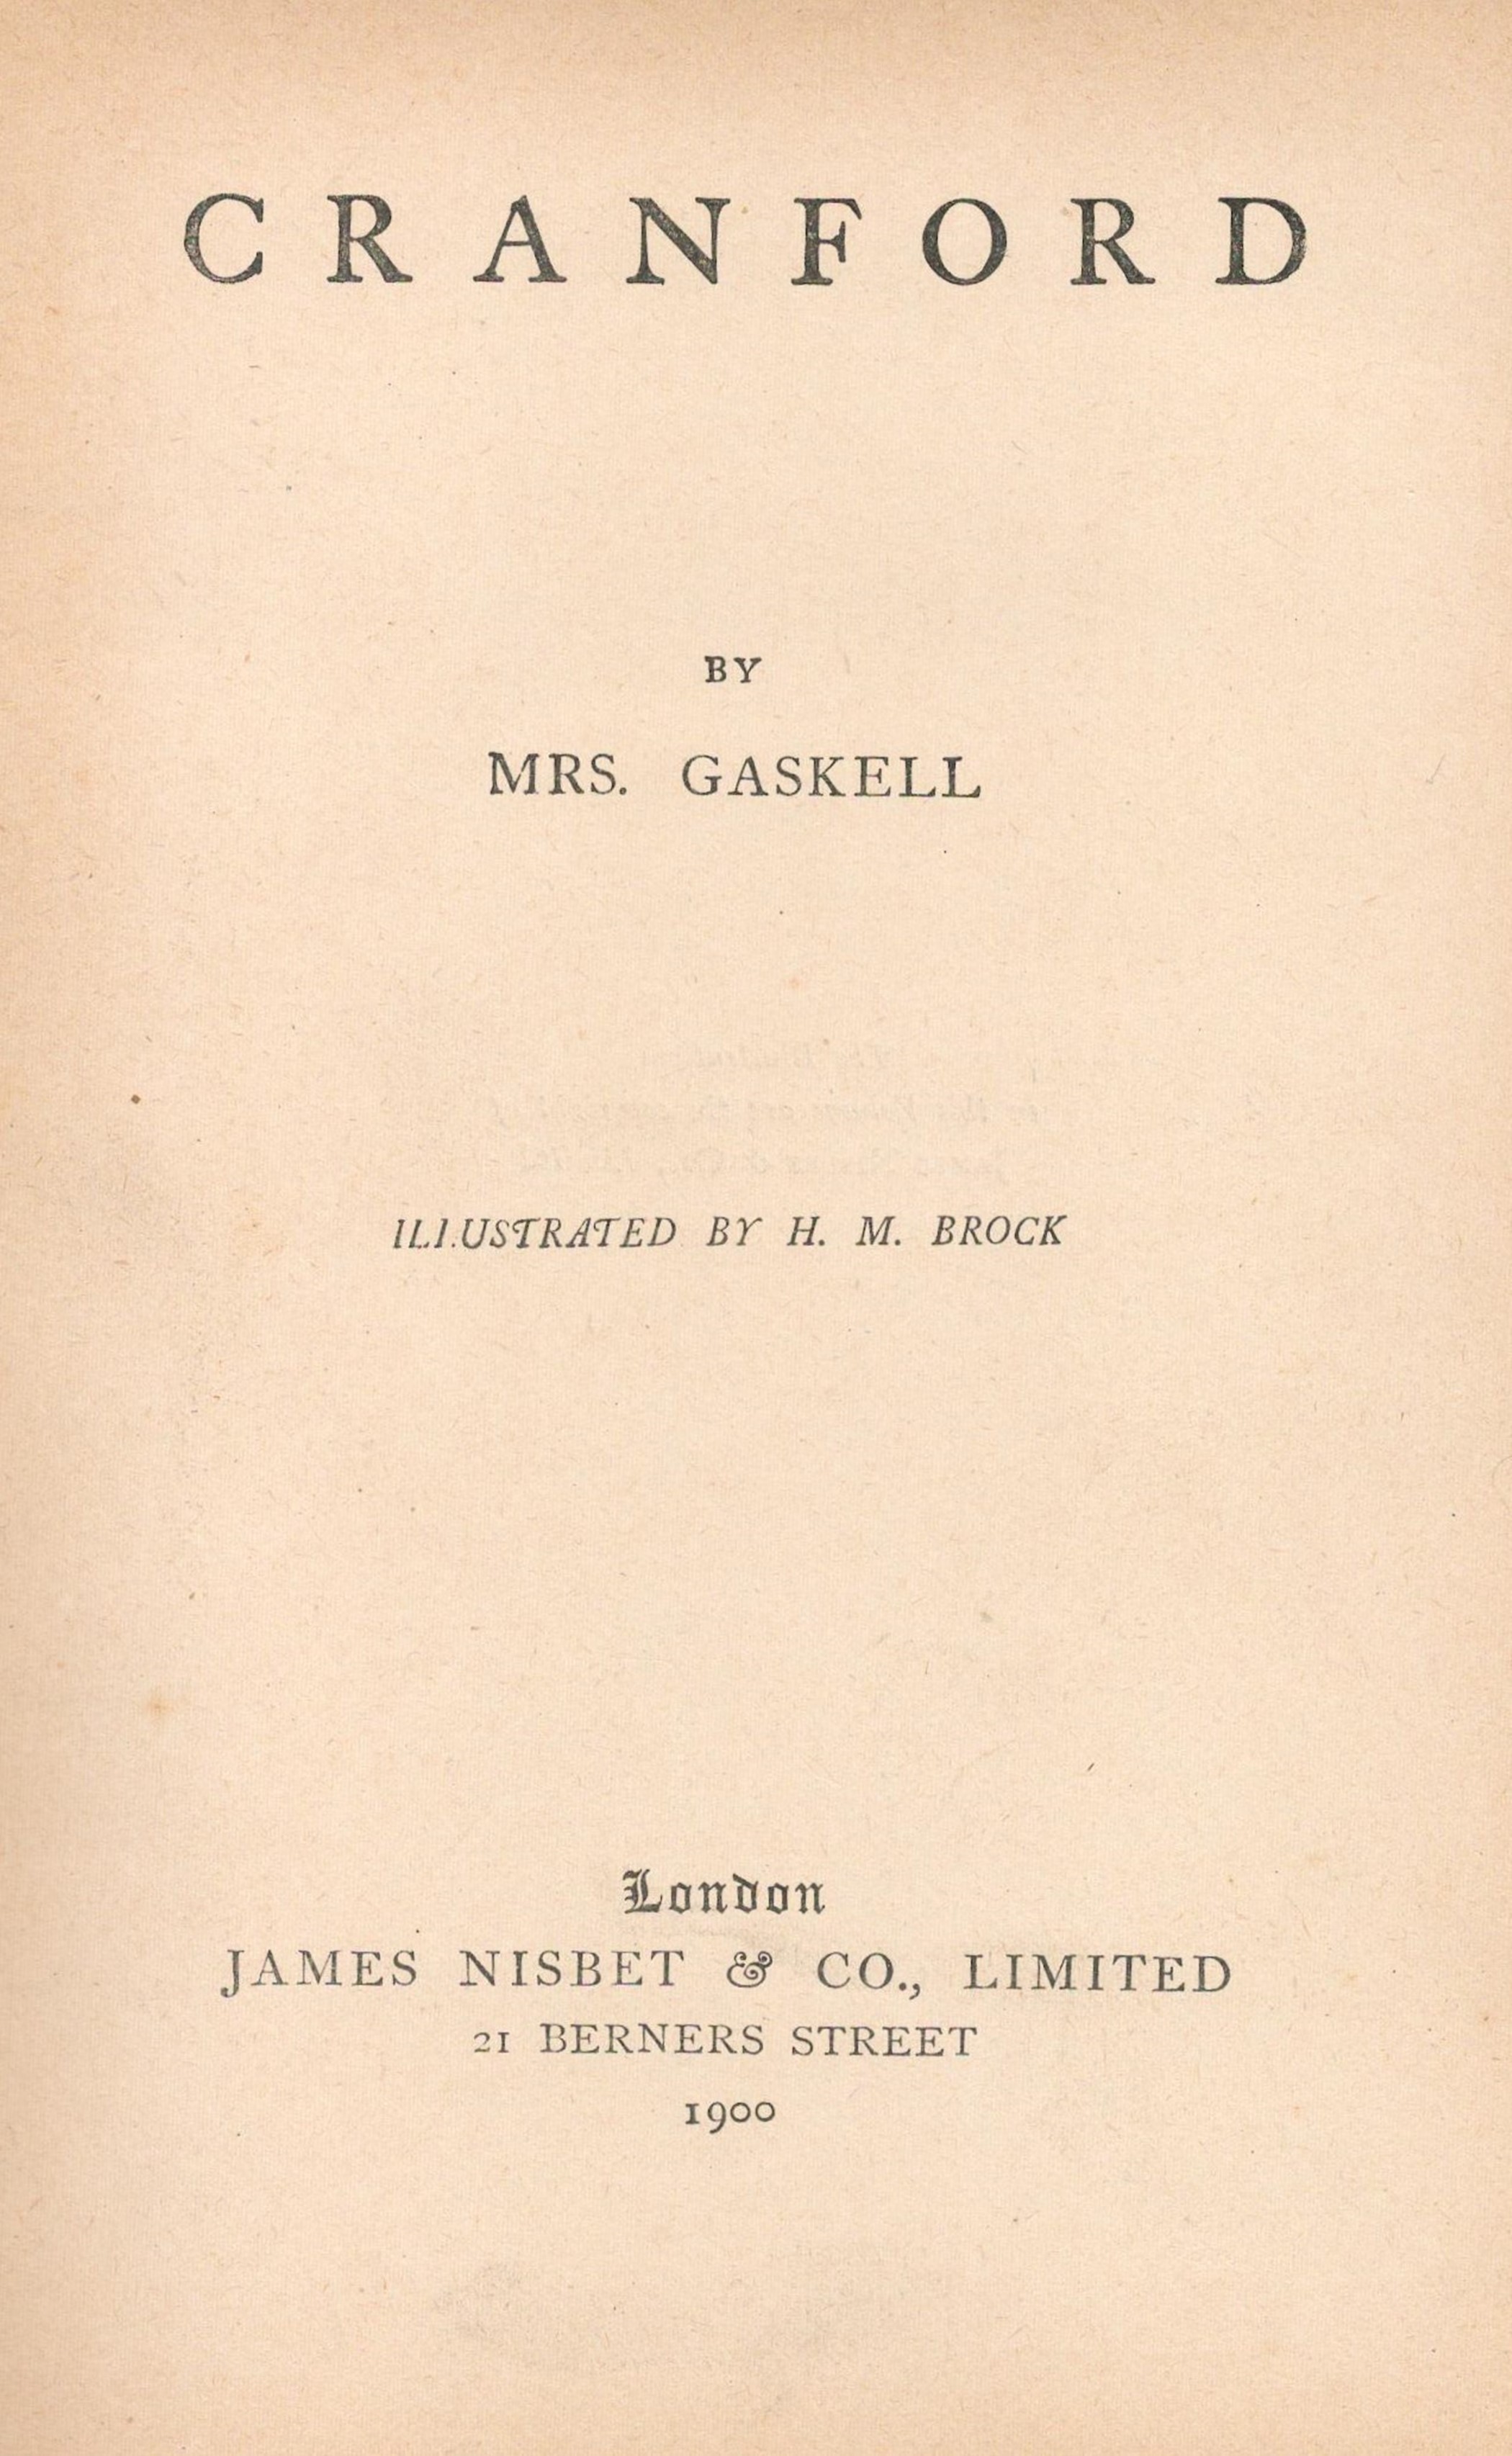 Cranford by Mrs Gaskell Hardback Book 1900 Edition unknown published by James Nisbet and Co Ltd some - Image 3 of 3